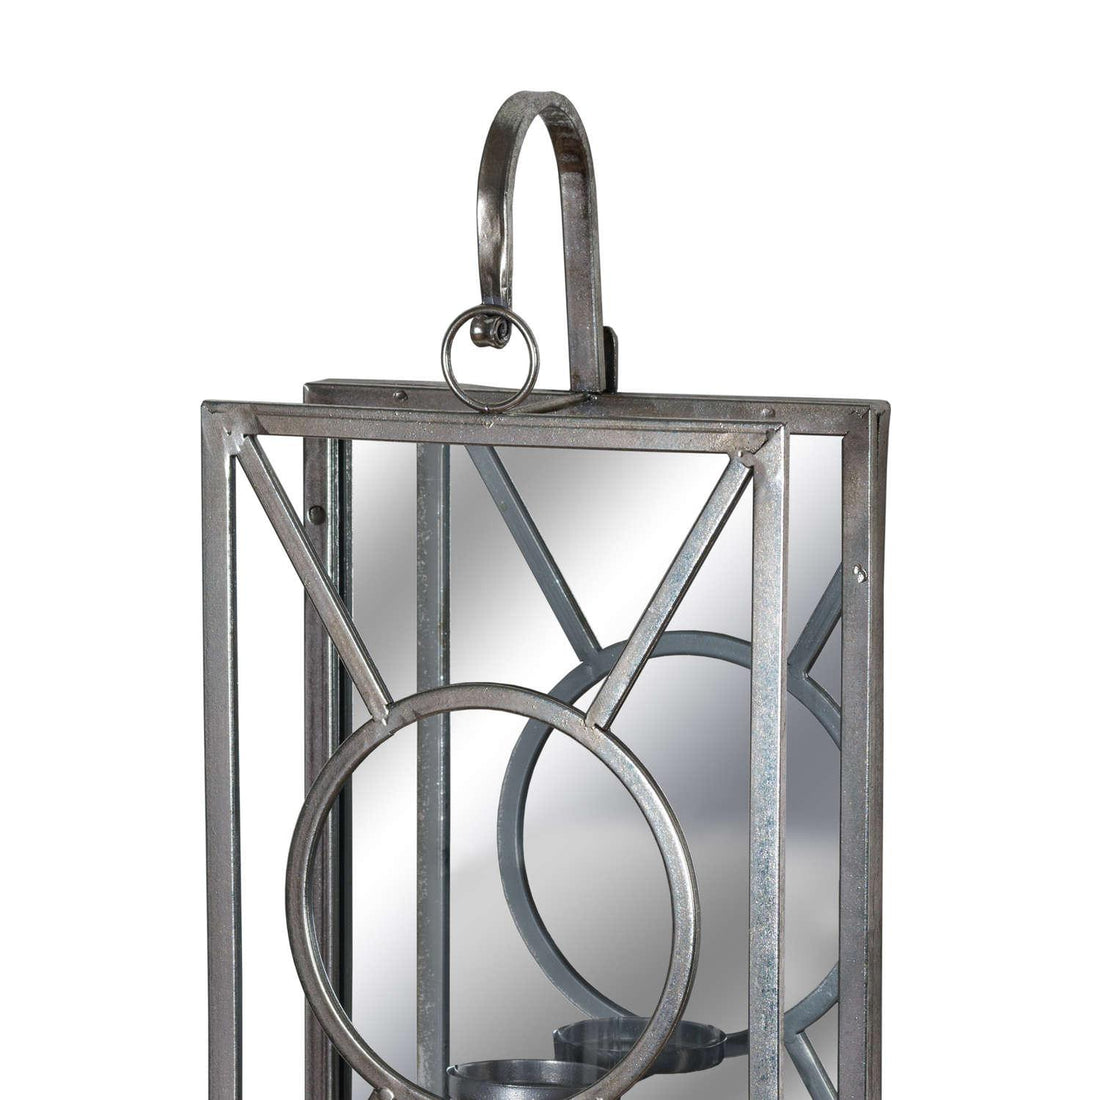 Antique Silver Rectangle Mirrored Tealight Holder - £79.95 - Gifts & Accessories > Candle Holders > Candle Holders 